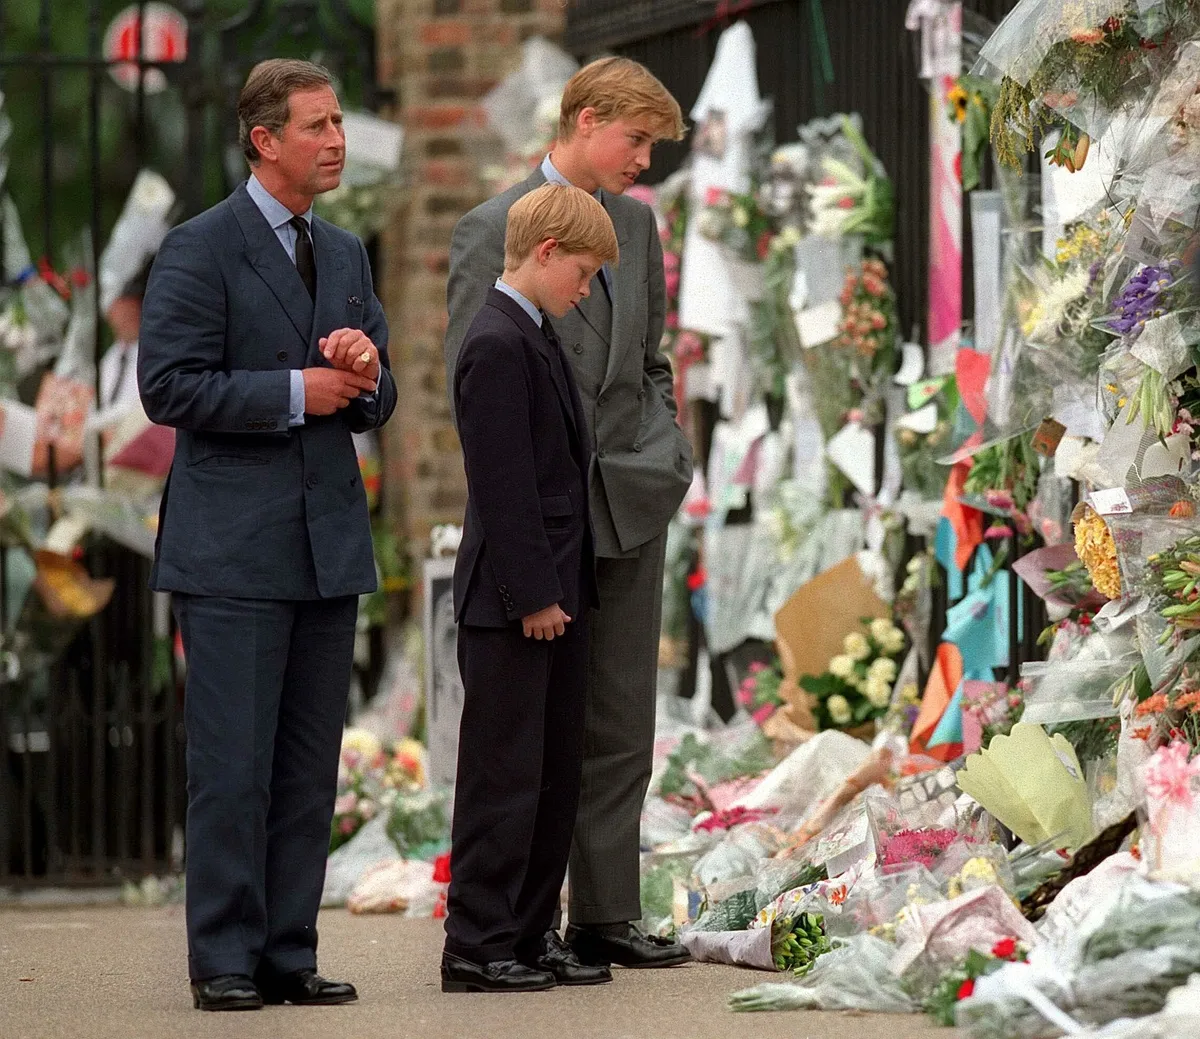 The Prince of Wales, Prince William and Prince Harry look at floral tributes to Diana, Princess of Wales outside Kensington Palace on September 5, 1997 in London, England.